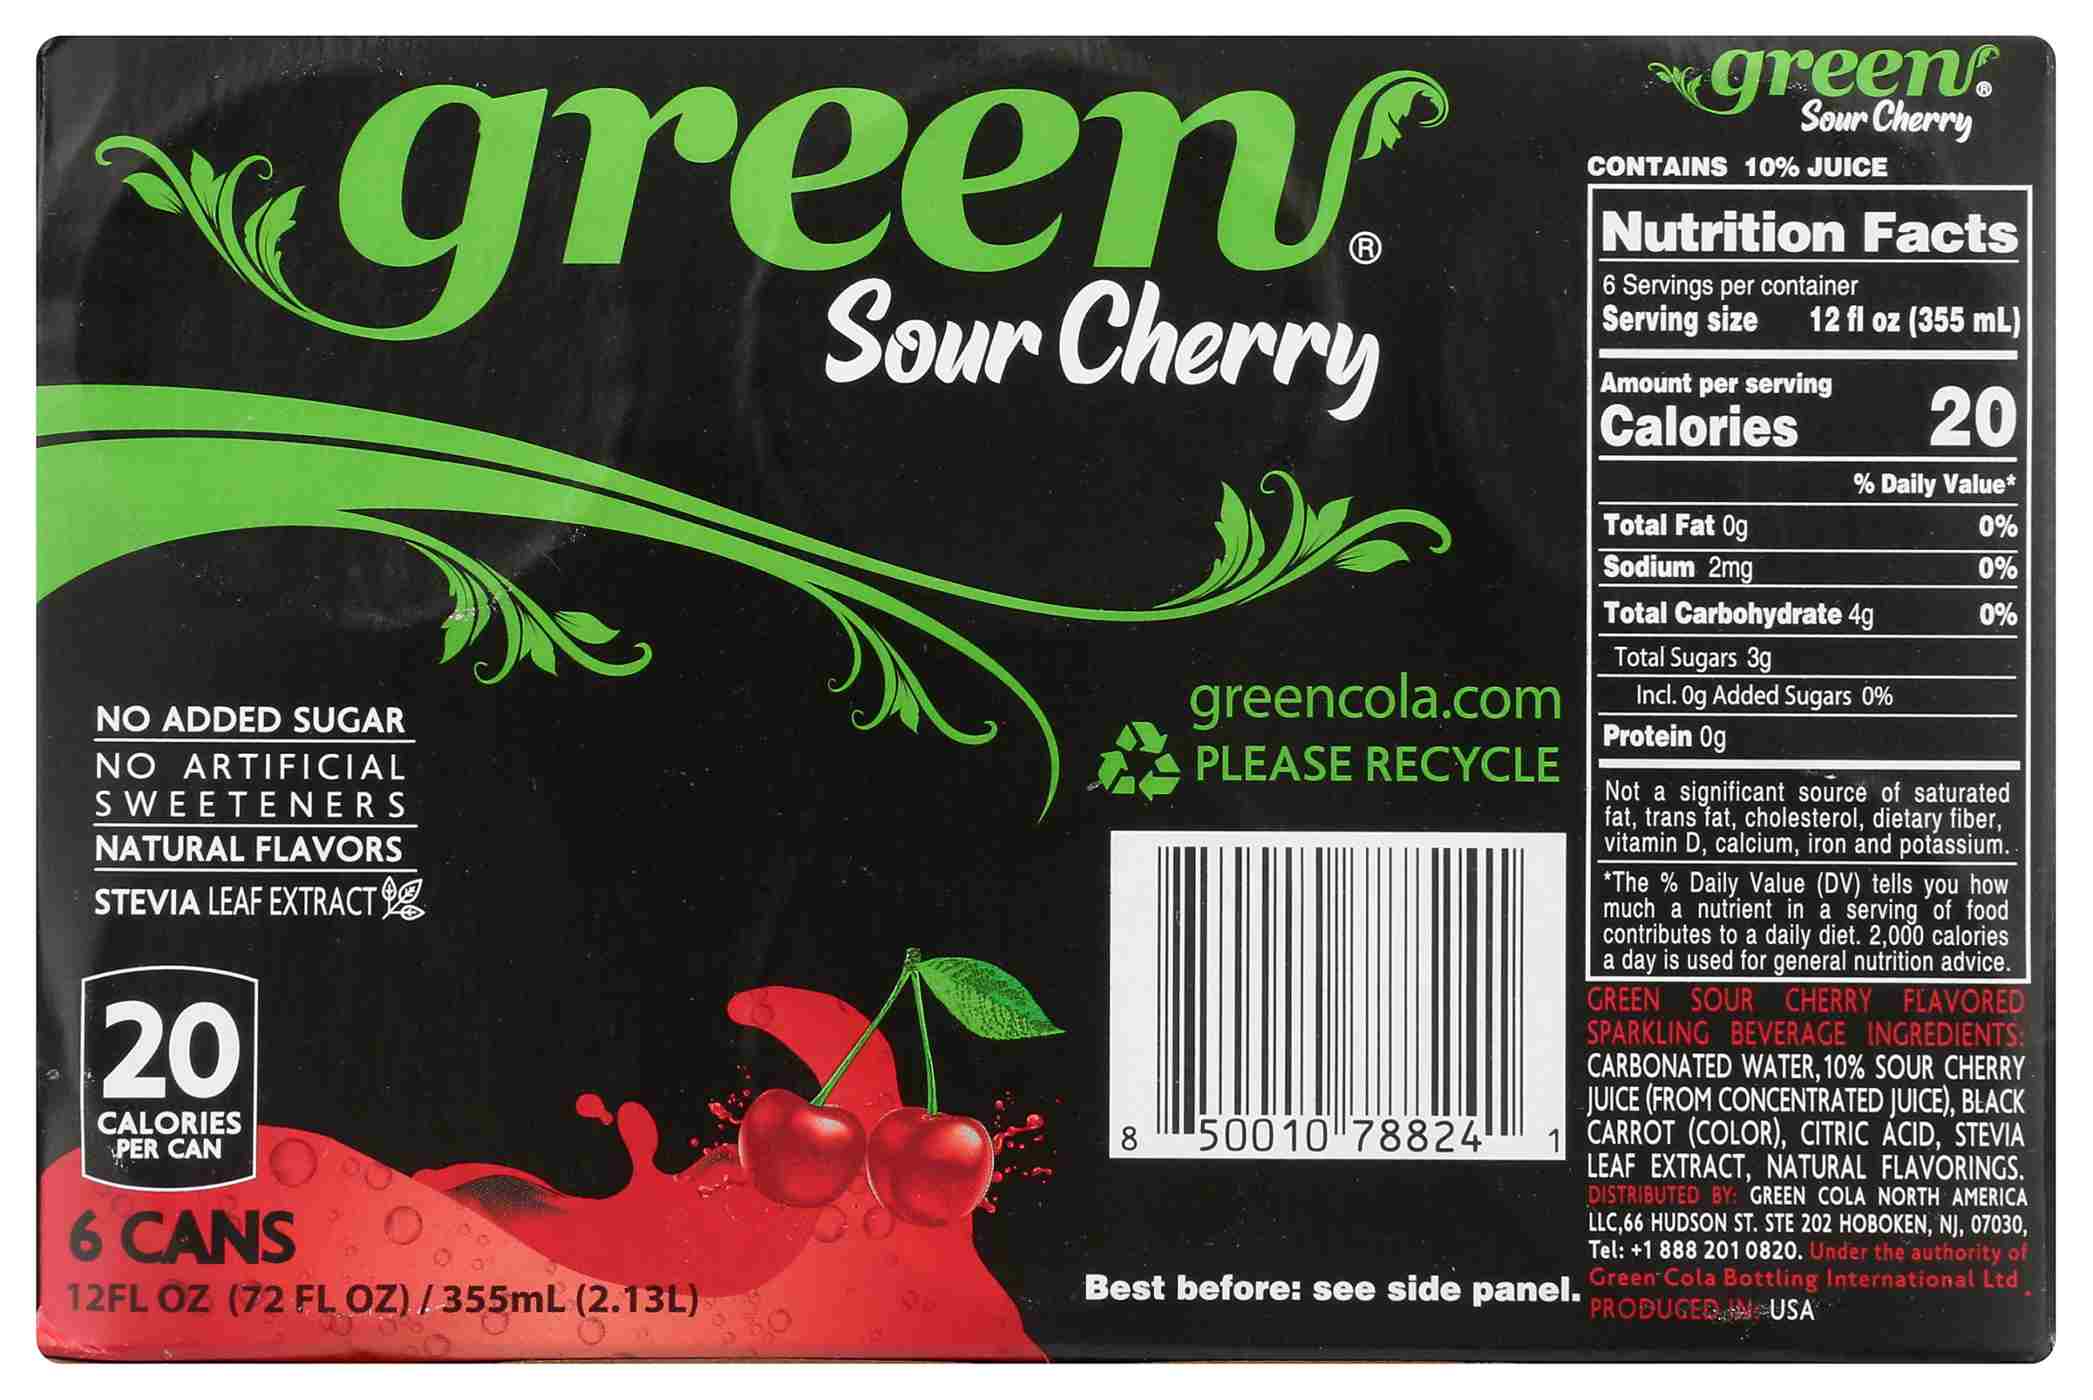 Green Sparkling Sour Cherry Soda 12 oz Cans; image 3 of 3